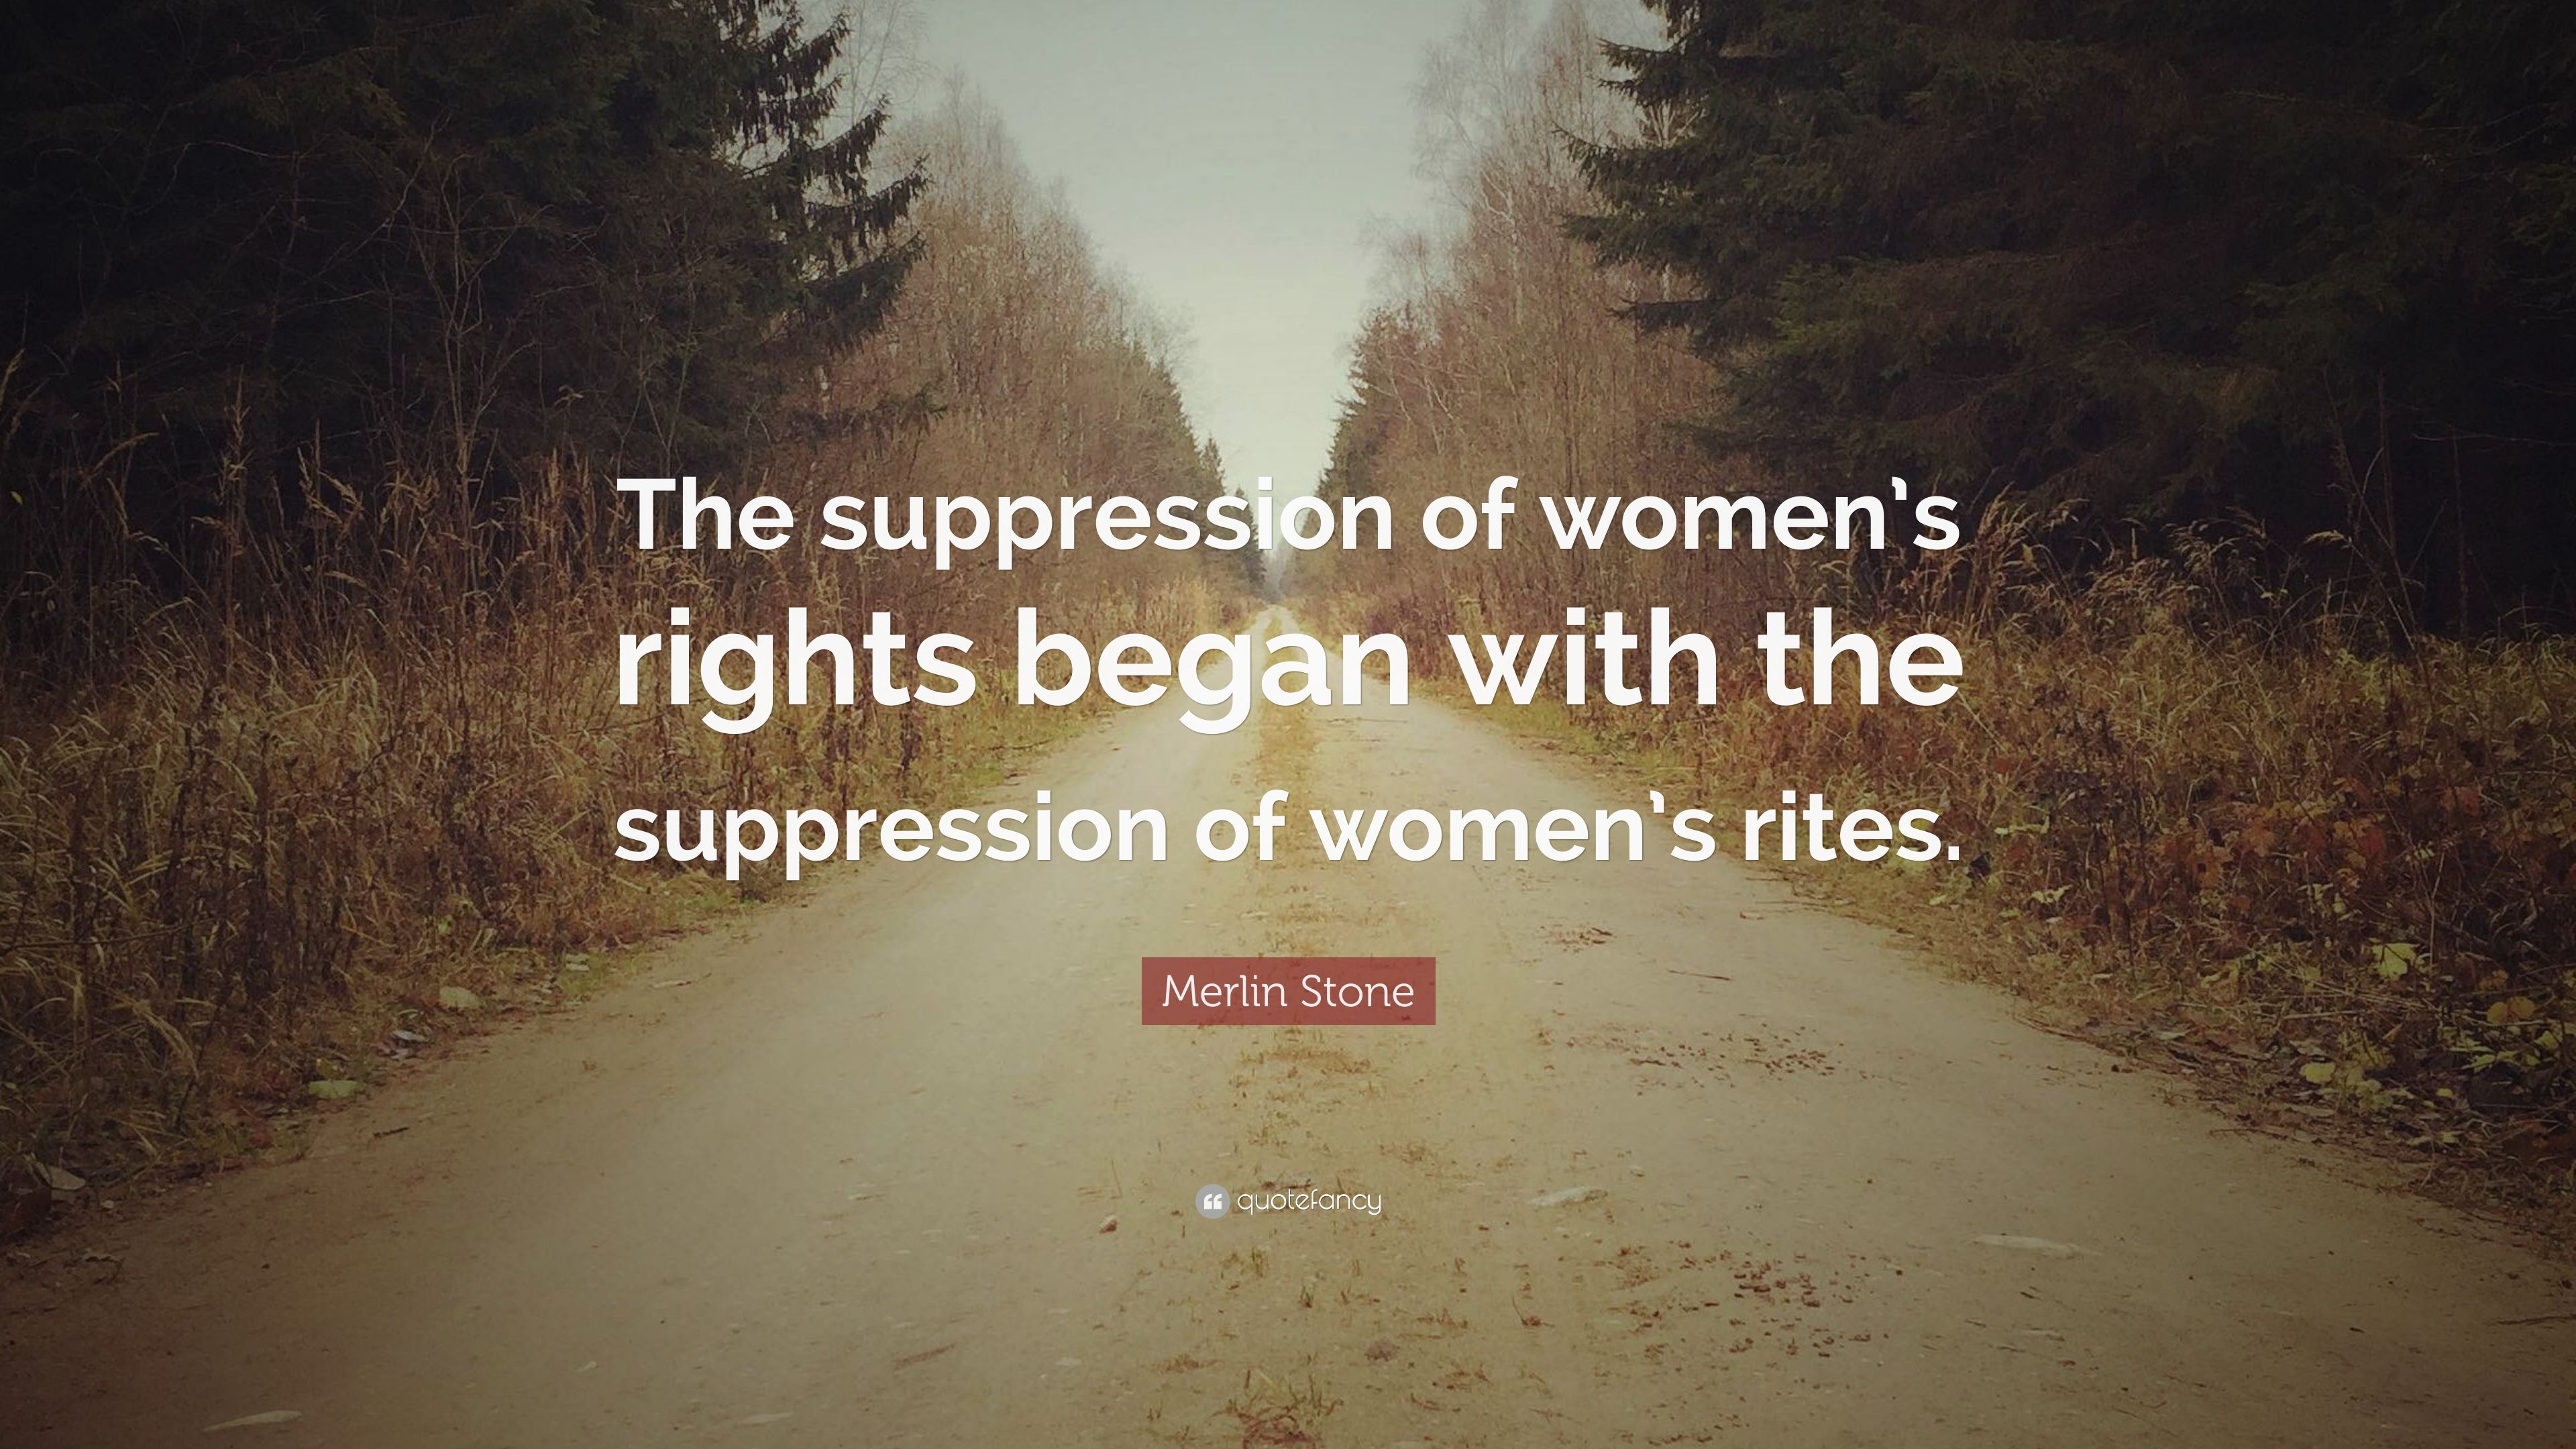 Merlin Stone Quote: “The suppression of women's rights began